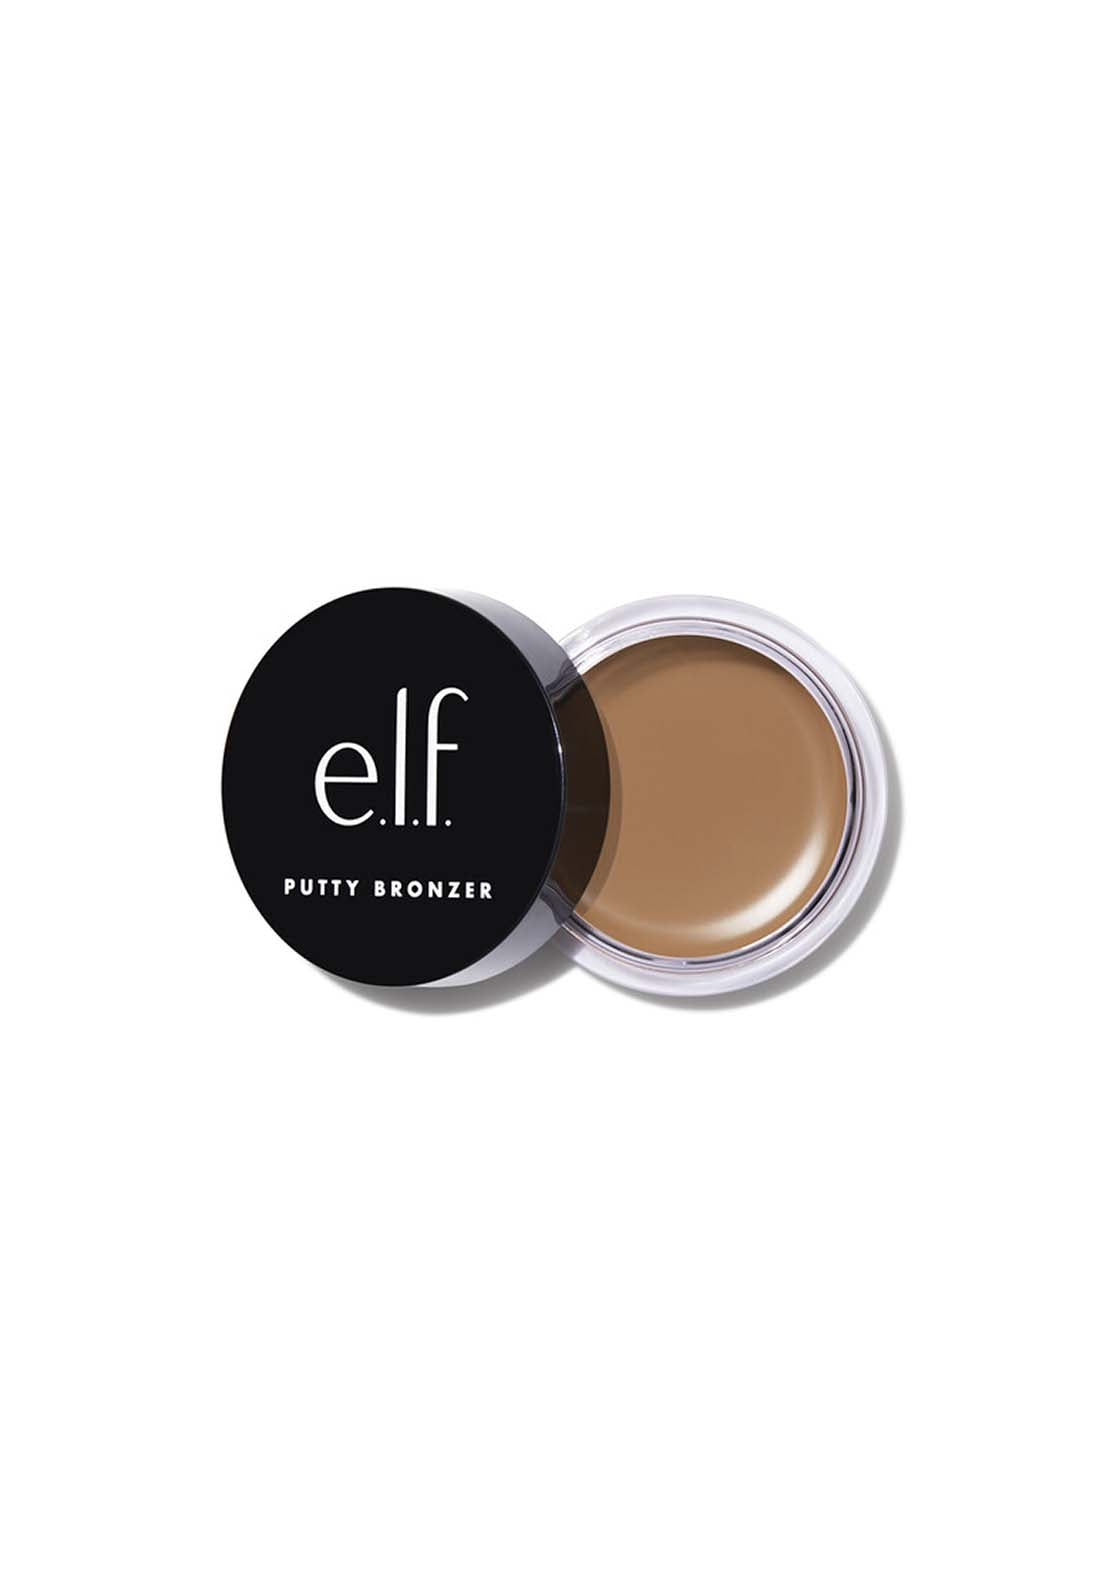 E.l.f Putty Bronzer - Tan Lines 1 Shaws Department Stores